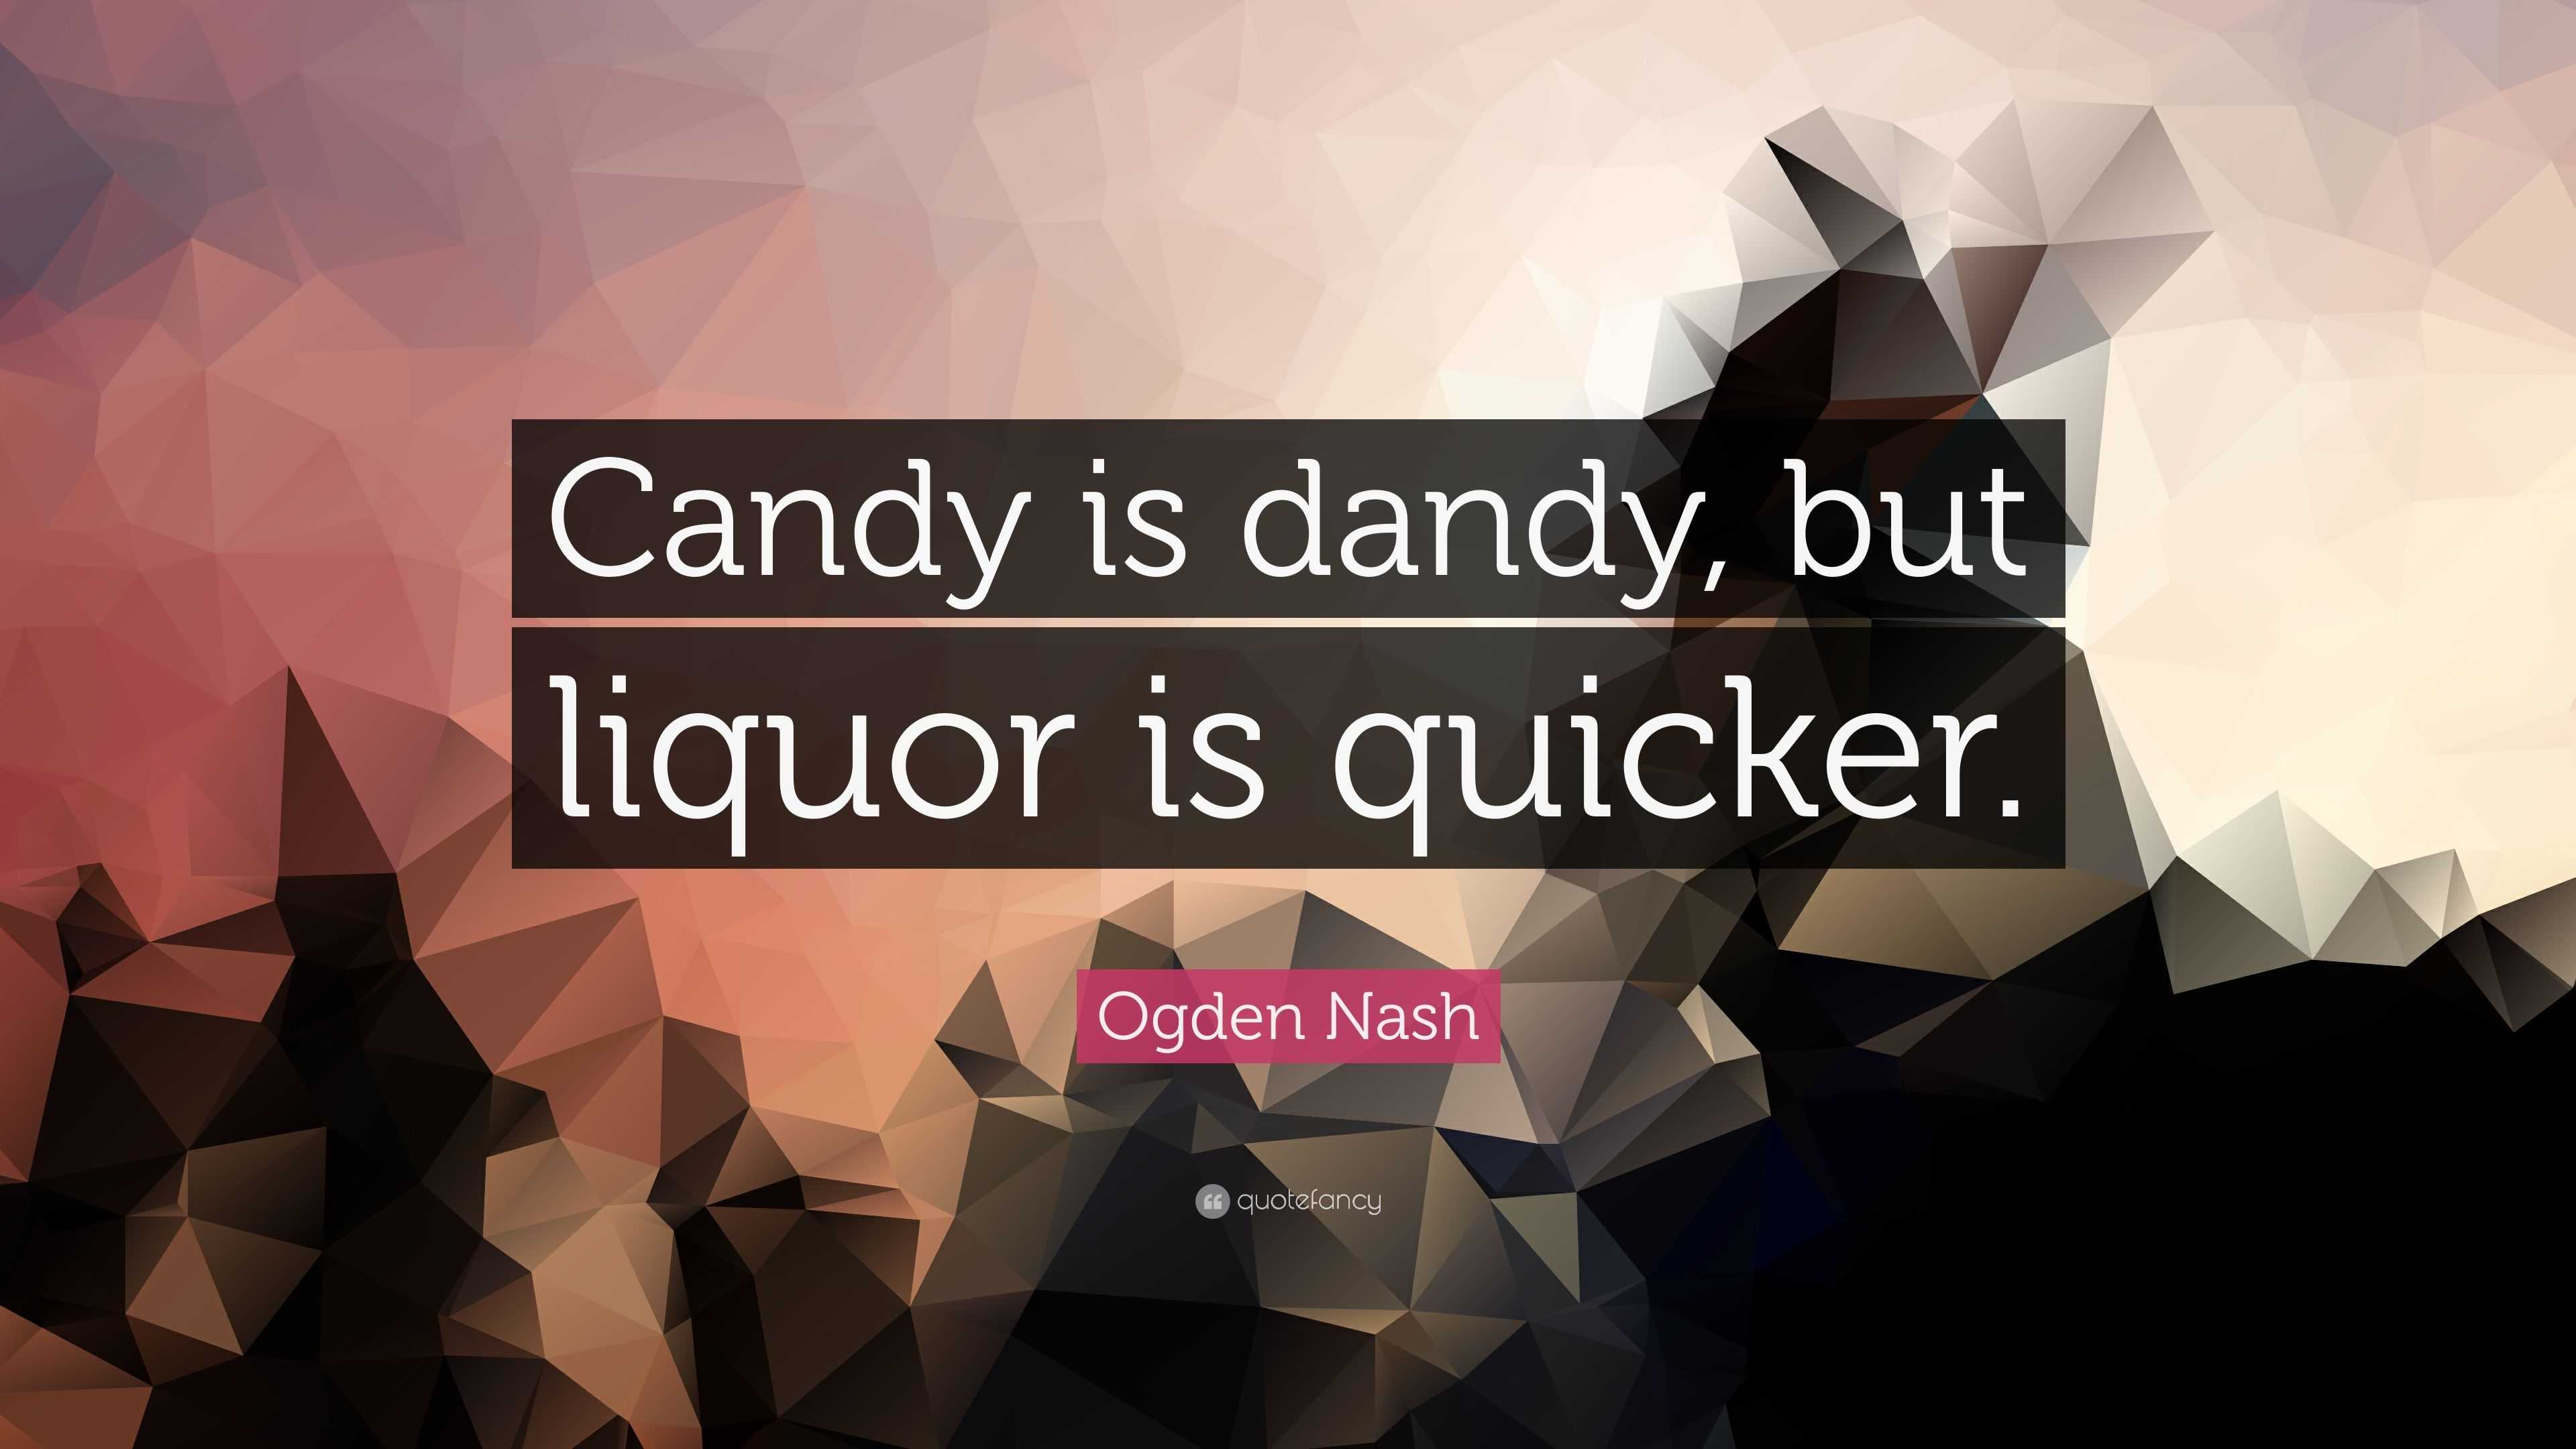 Ogden Nash Quote: “Candy is dandy, but liquor is quicker.”